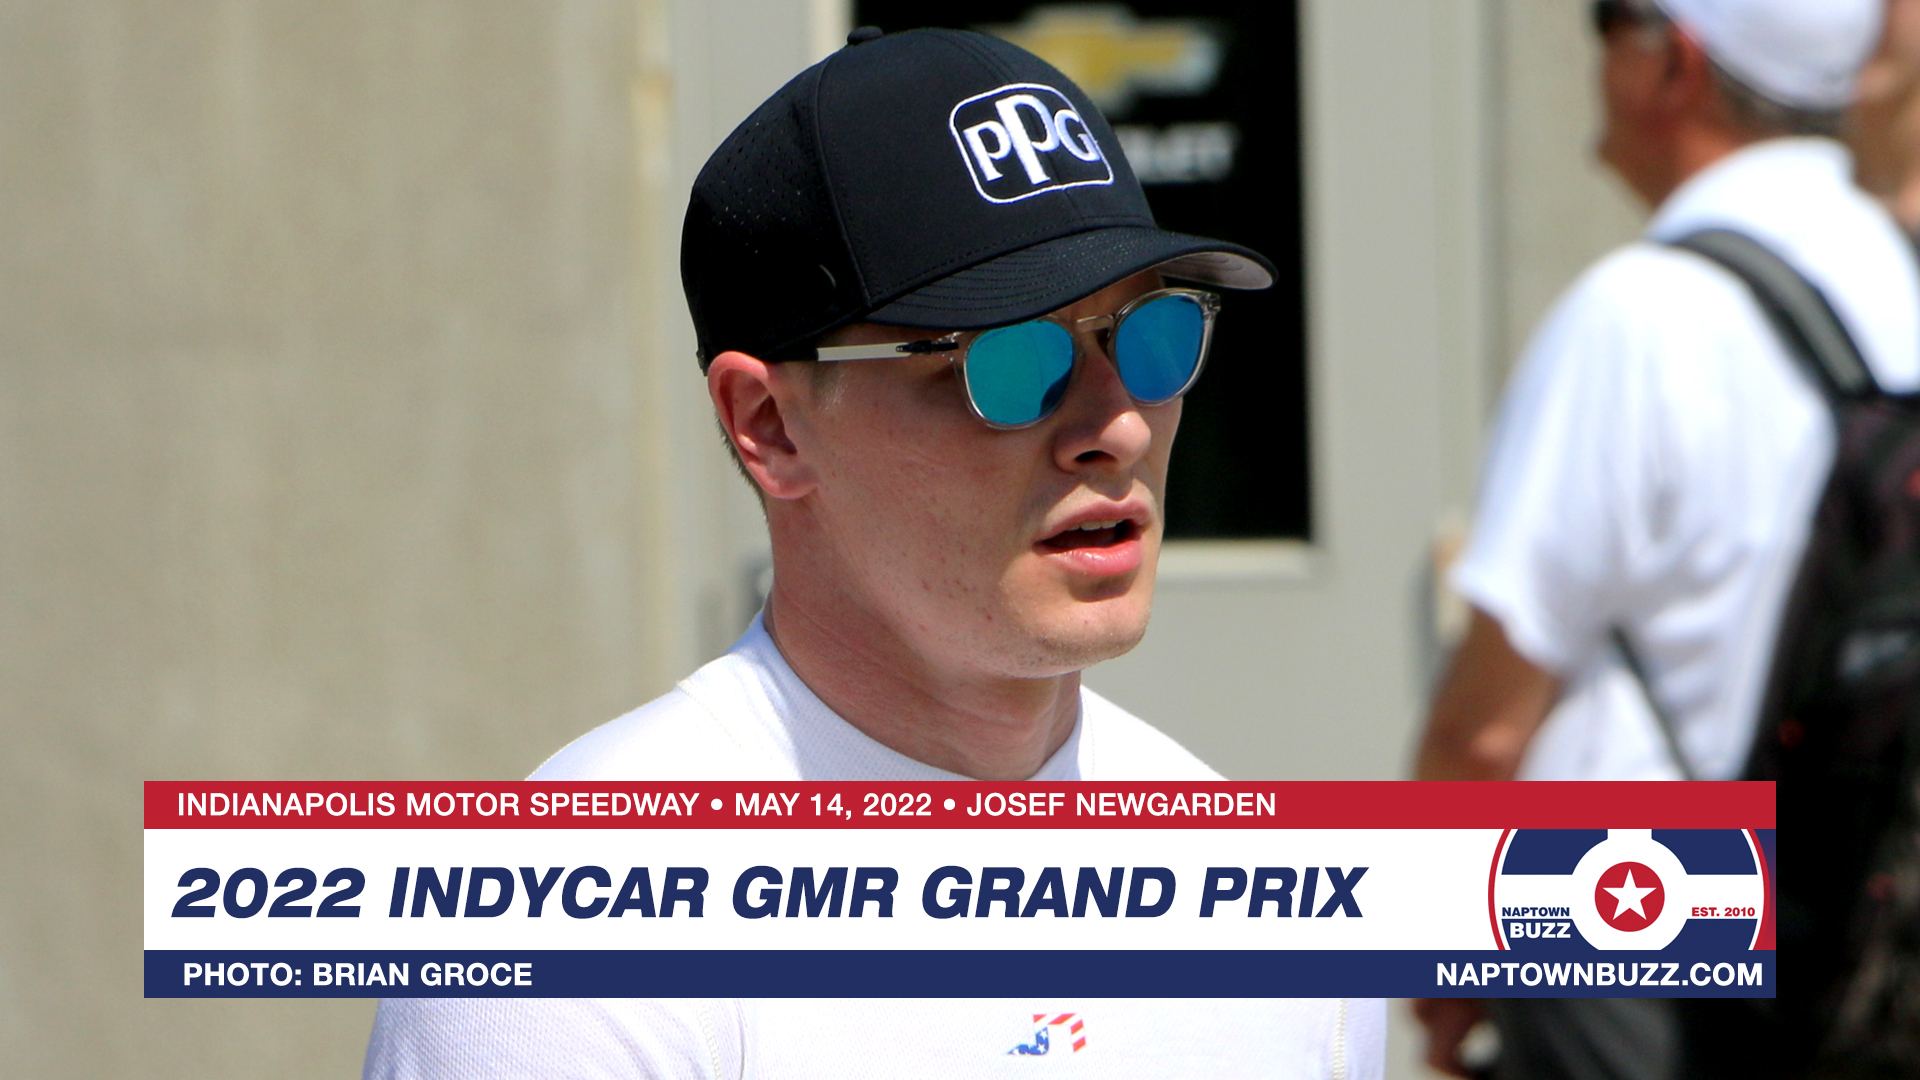 Josef Newgarden on Indy Car Grand Prix Race Day, May 14, 2022